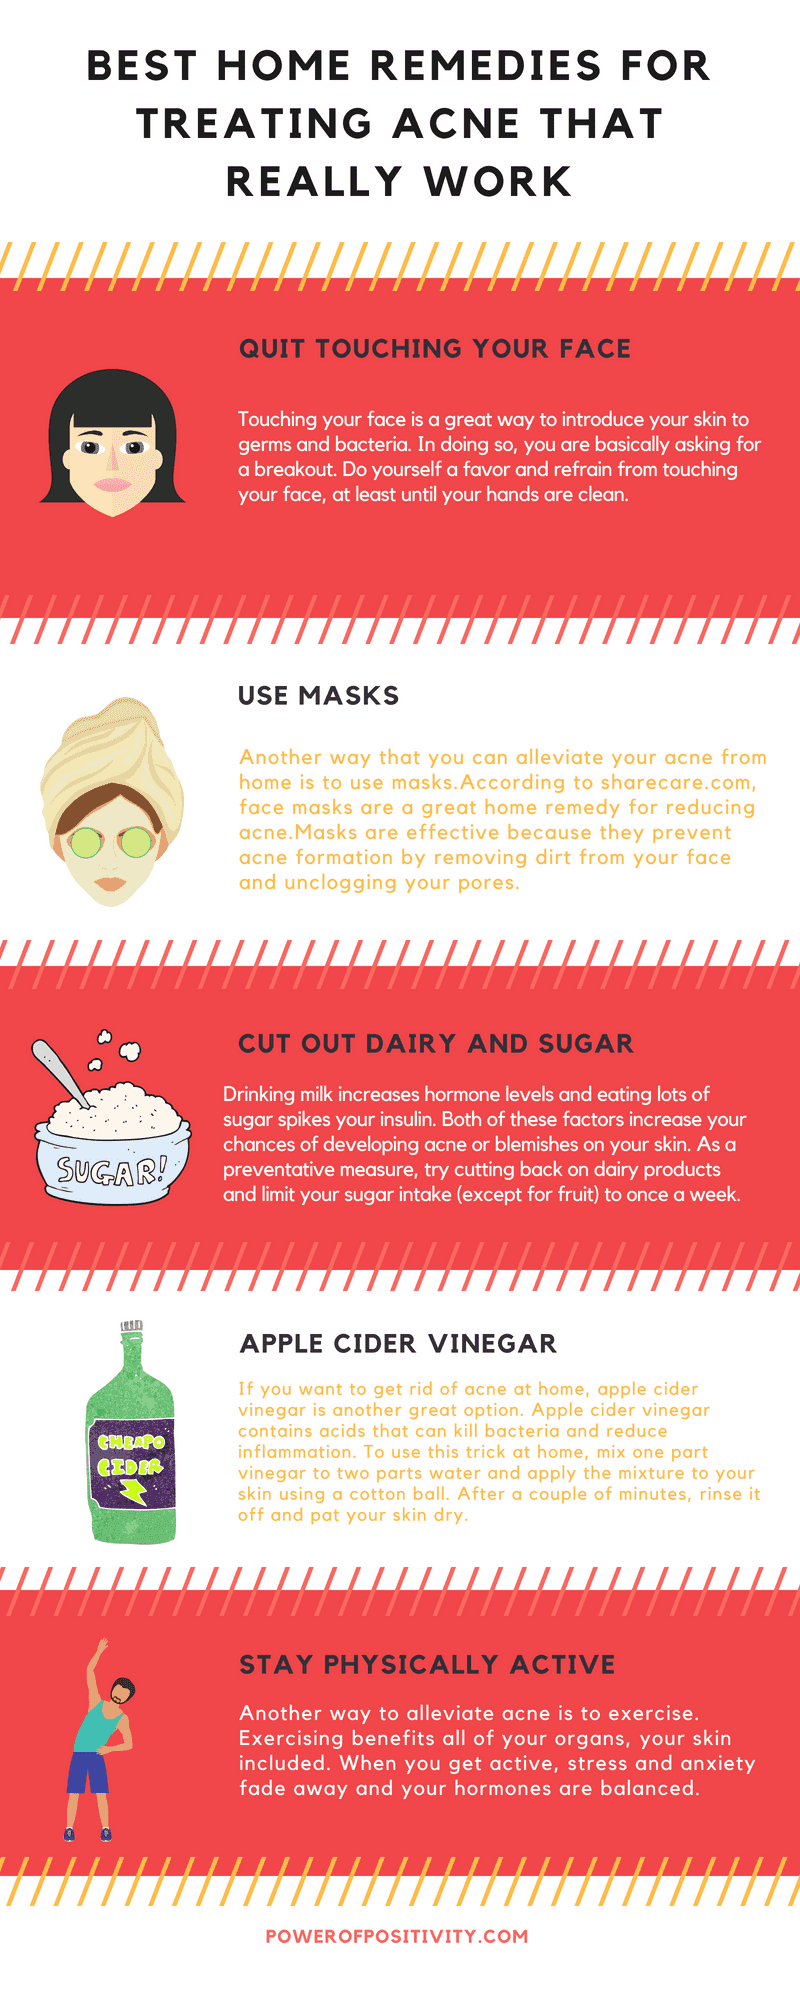 Home remedies for treating acne that really work